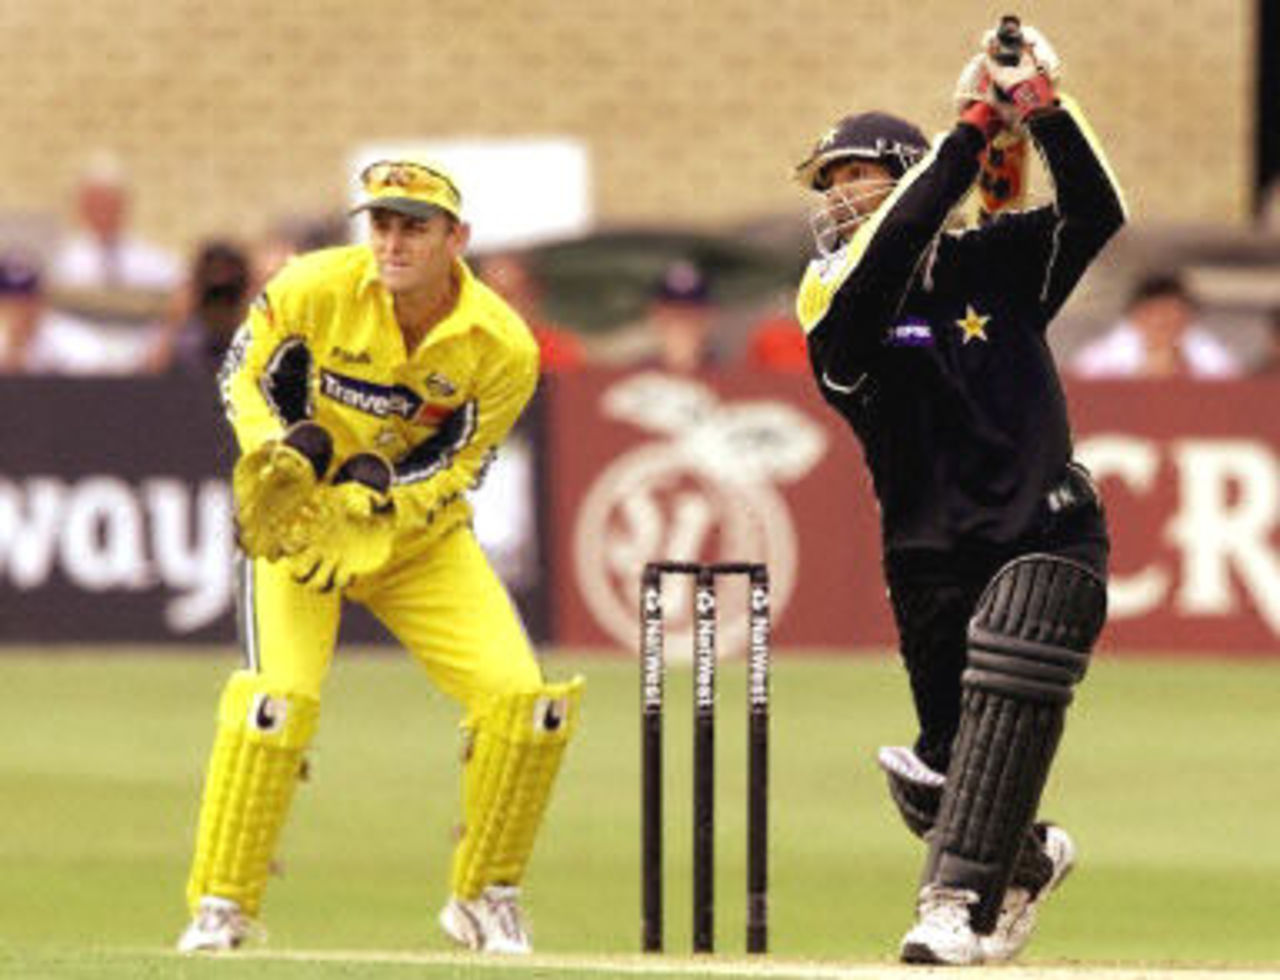 Yousuf Youhana cracks a ball over cover from Shane Warne as Adam Gilchrist looks on, 8th ODI at Trent Bridge, 19 June 2001.